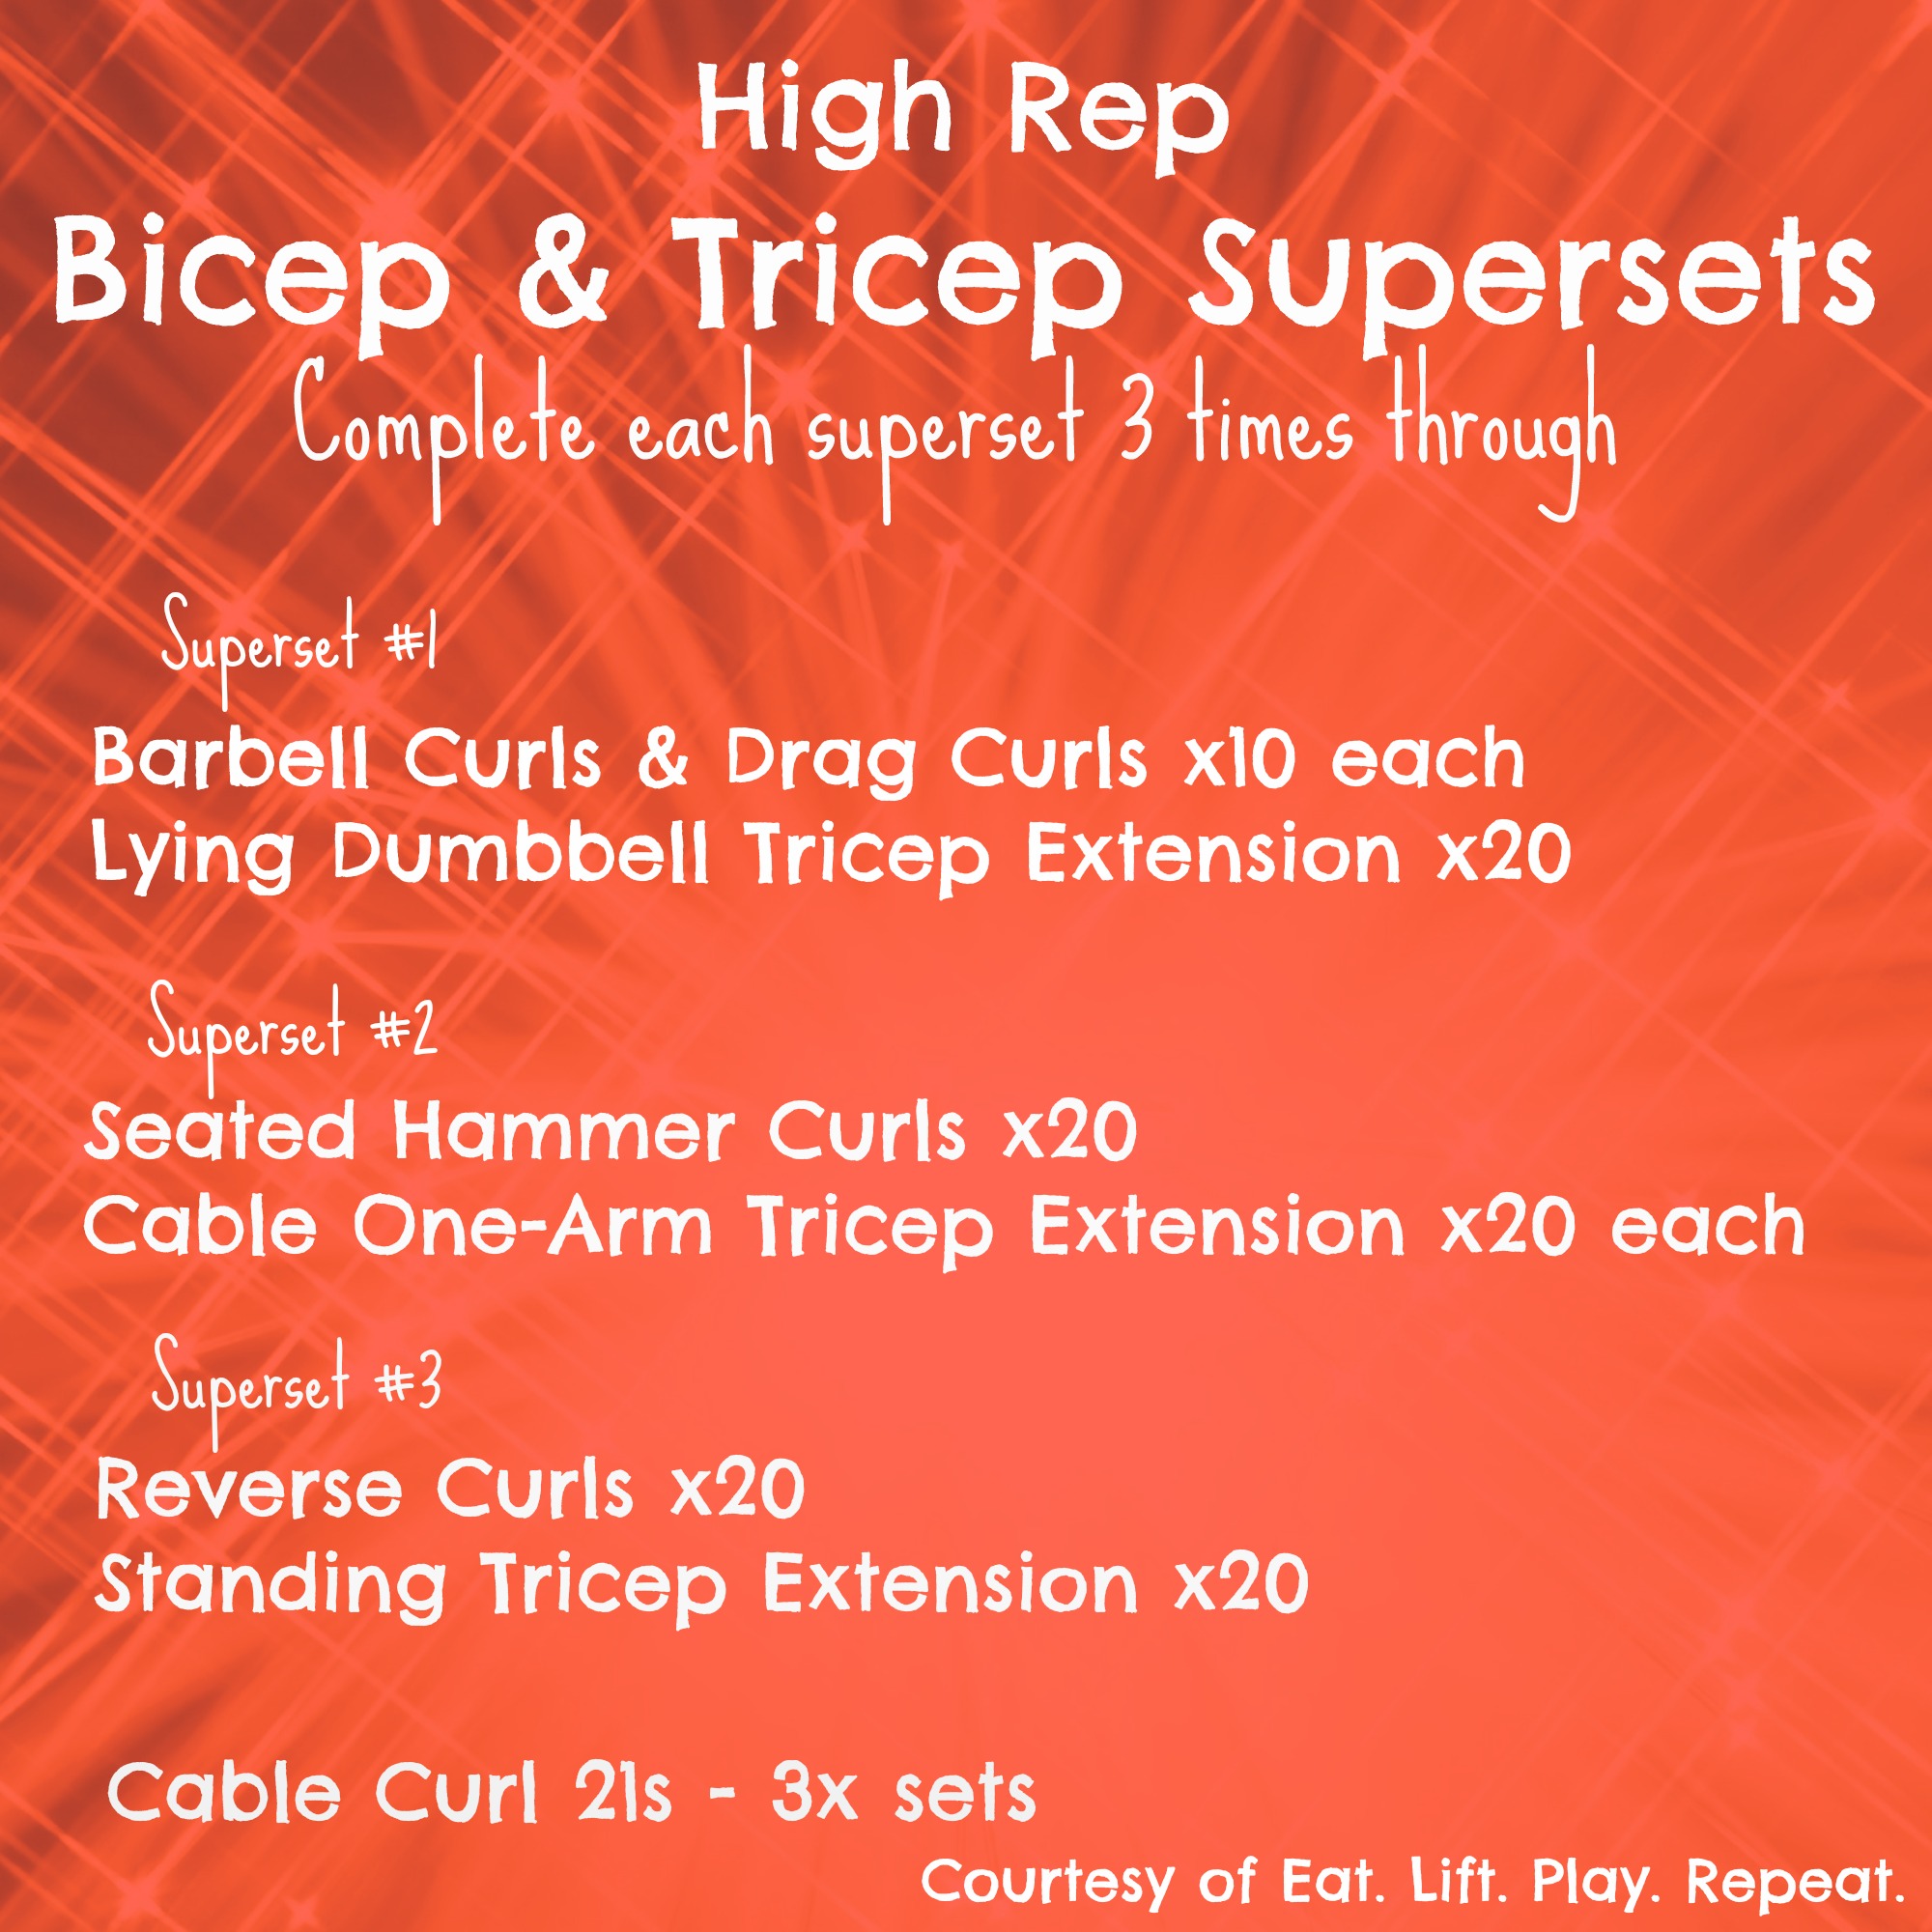 Bicep/Tricep Day  Bicep and tricep workout, Free weight workout